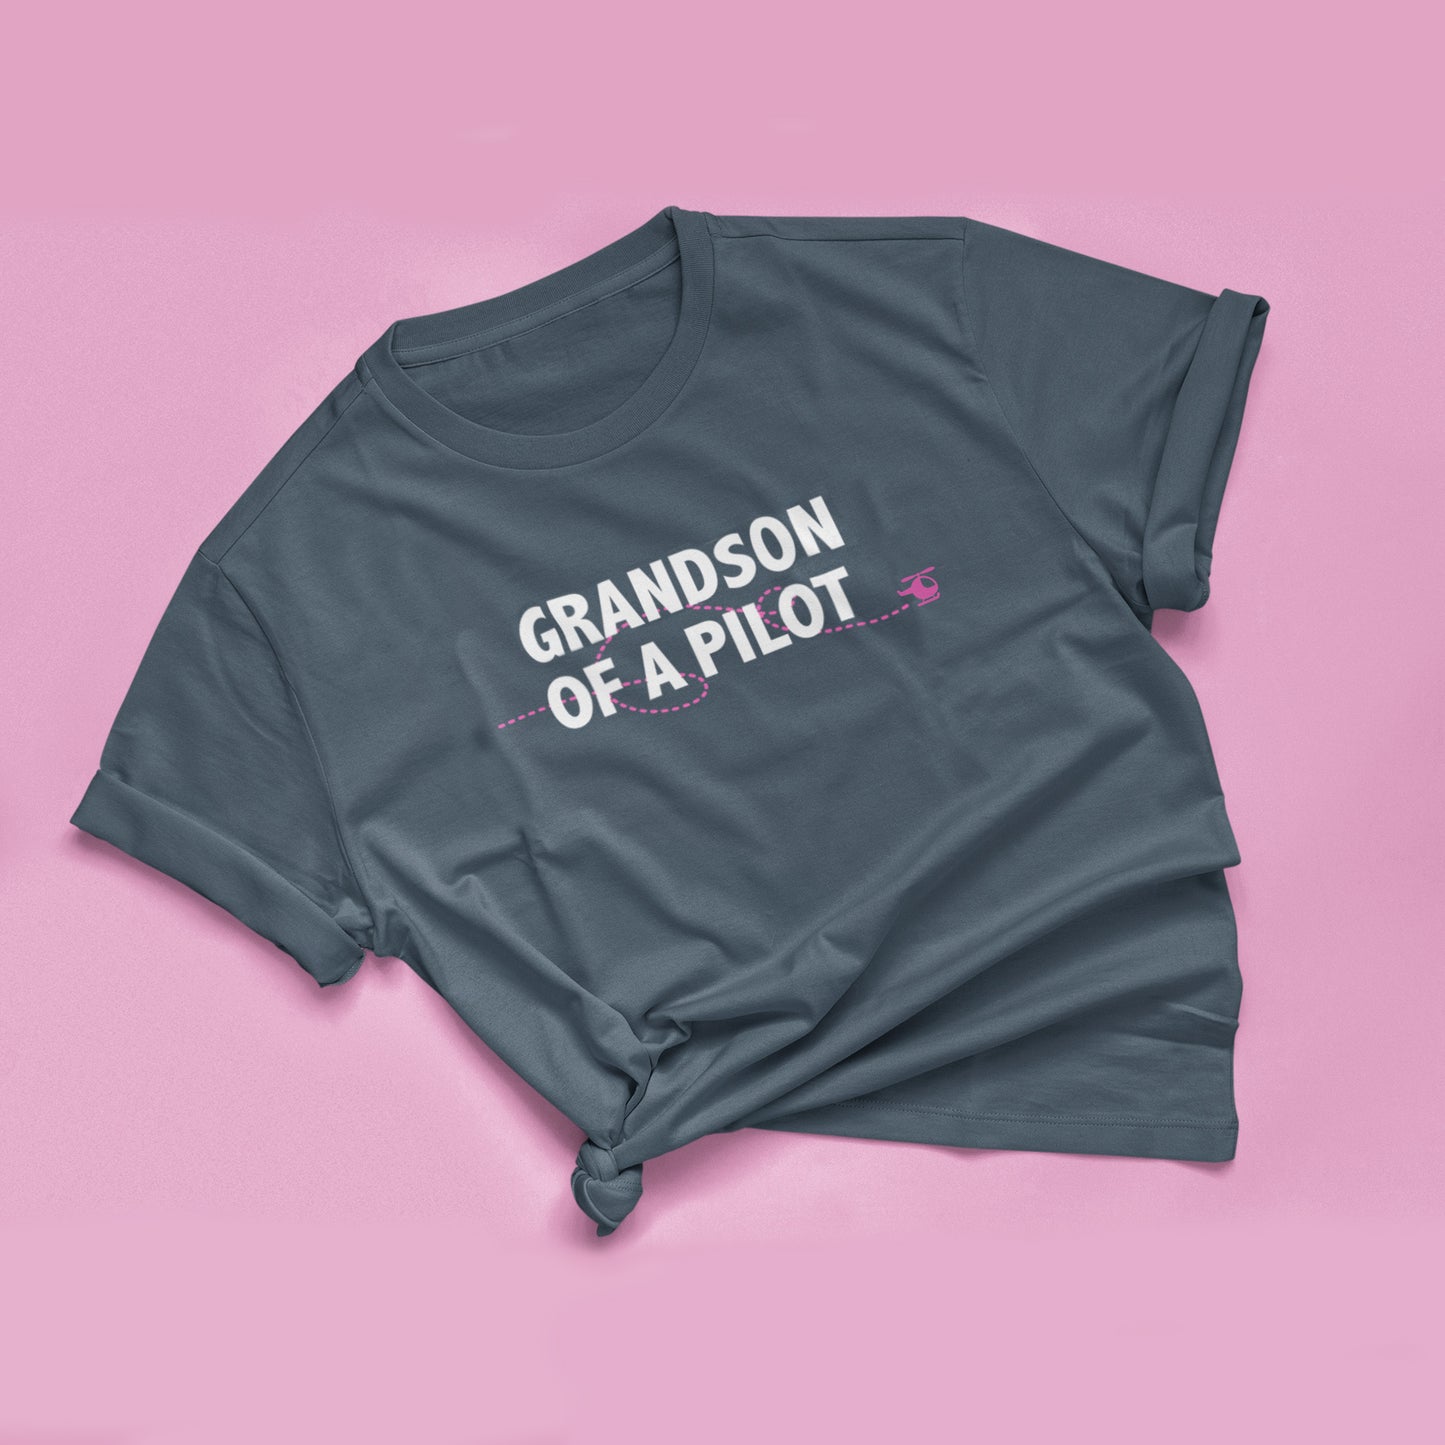 Grandson of the/a Pilot - Youth T-shirt